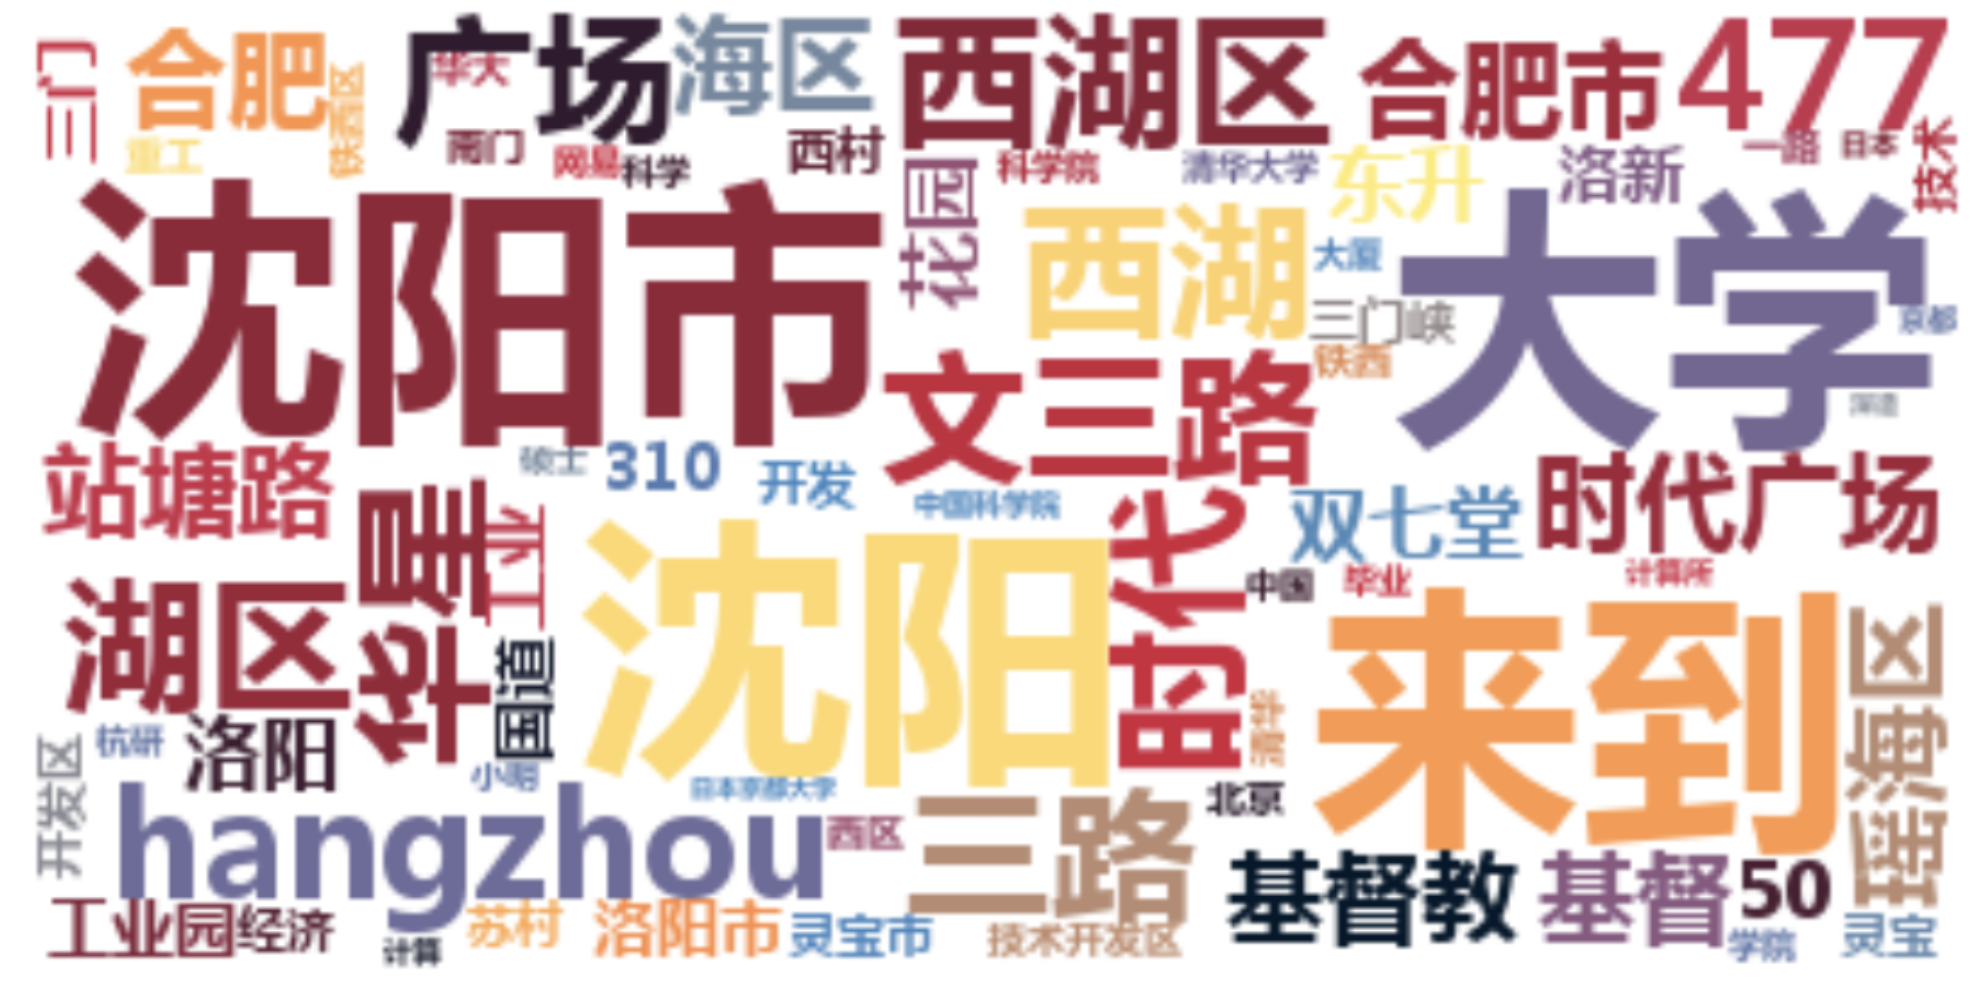 https://github.com/chenmingxiang110/SimpleChinese/raw/master/pics/wordcloud.png